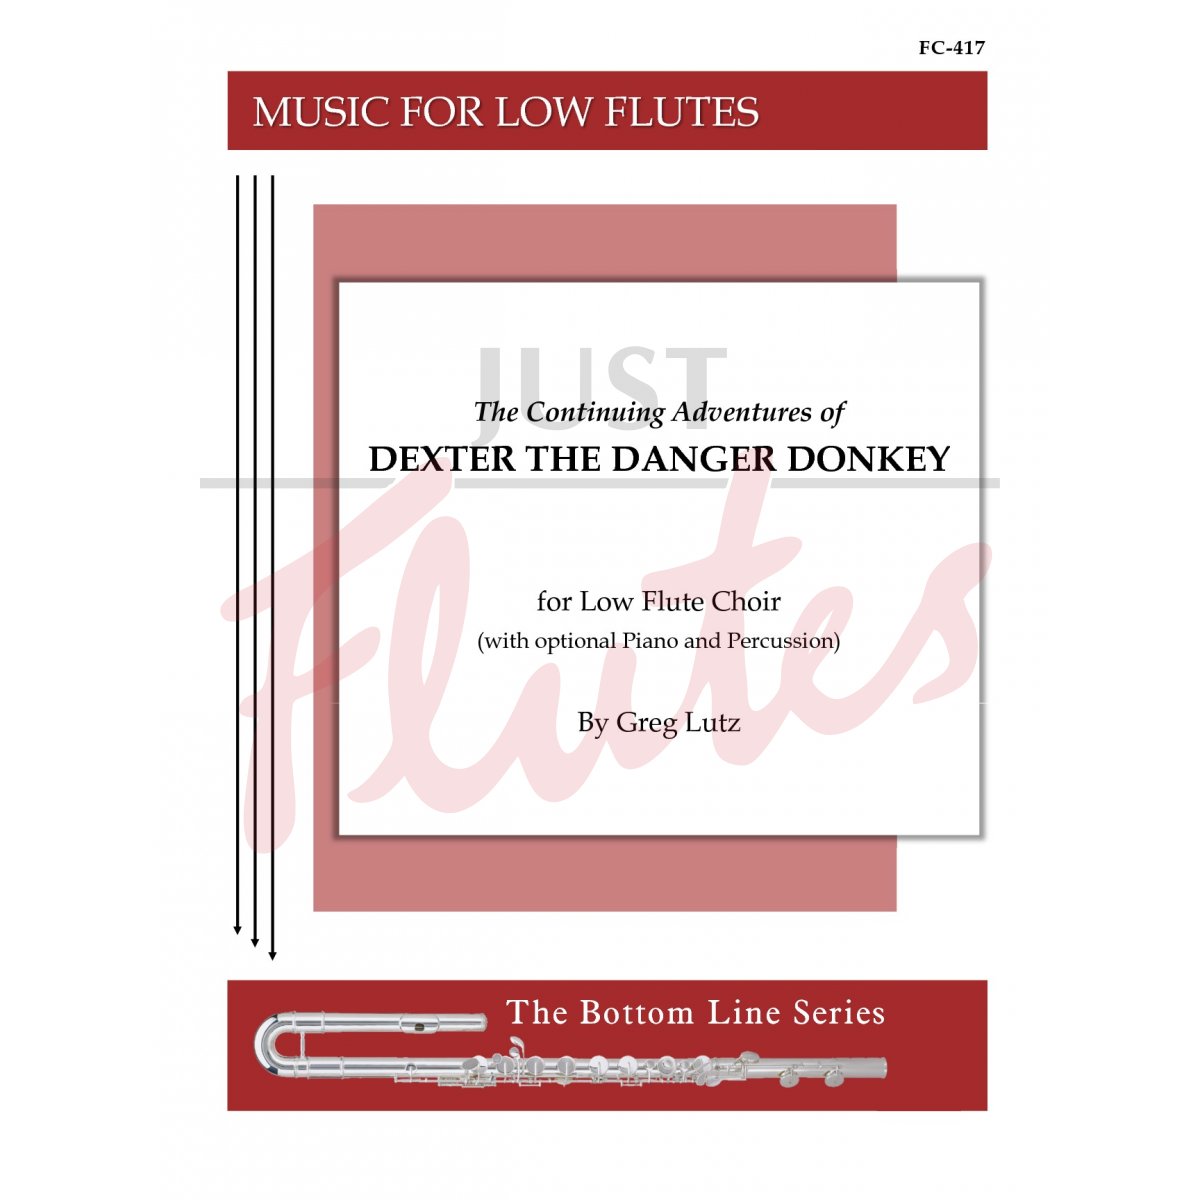 The Continuing Adventures of Dexter the Danger Donkey for Low Flute Ensemble